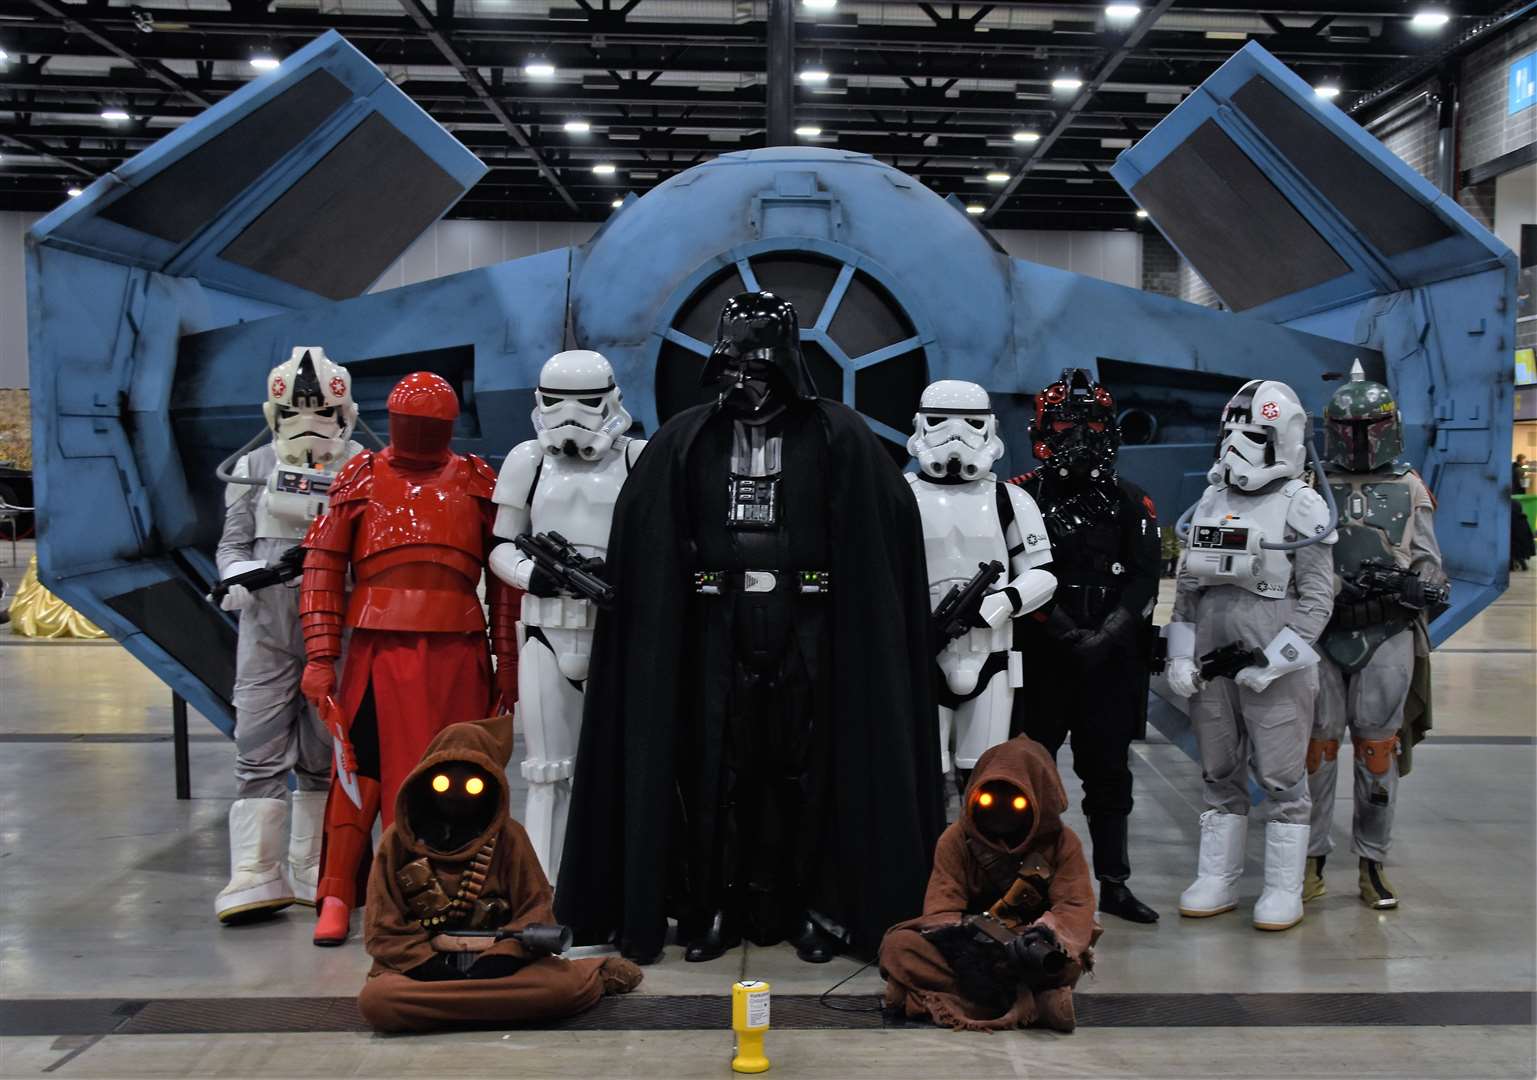 Comic con has confirmed a date for Aberdeen next spring.